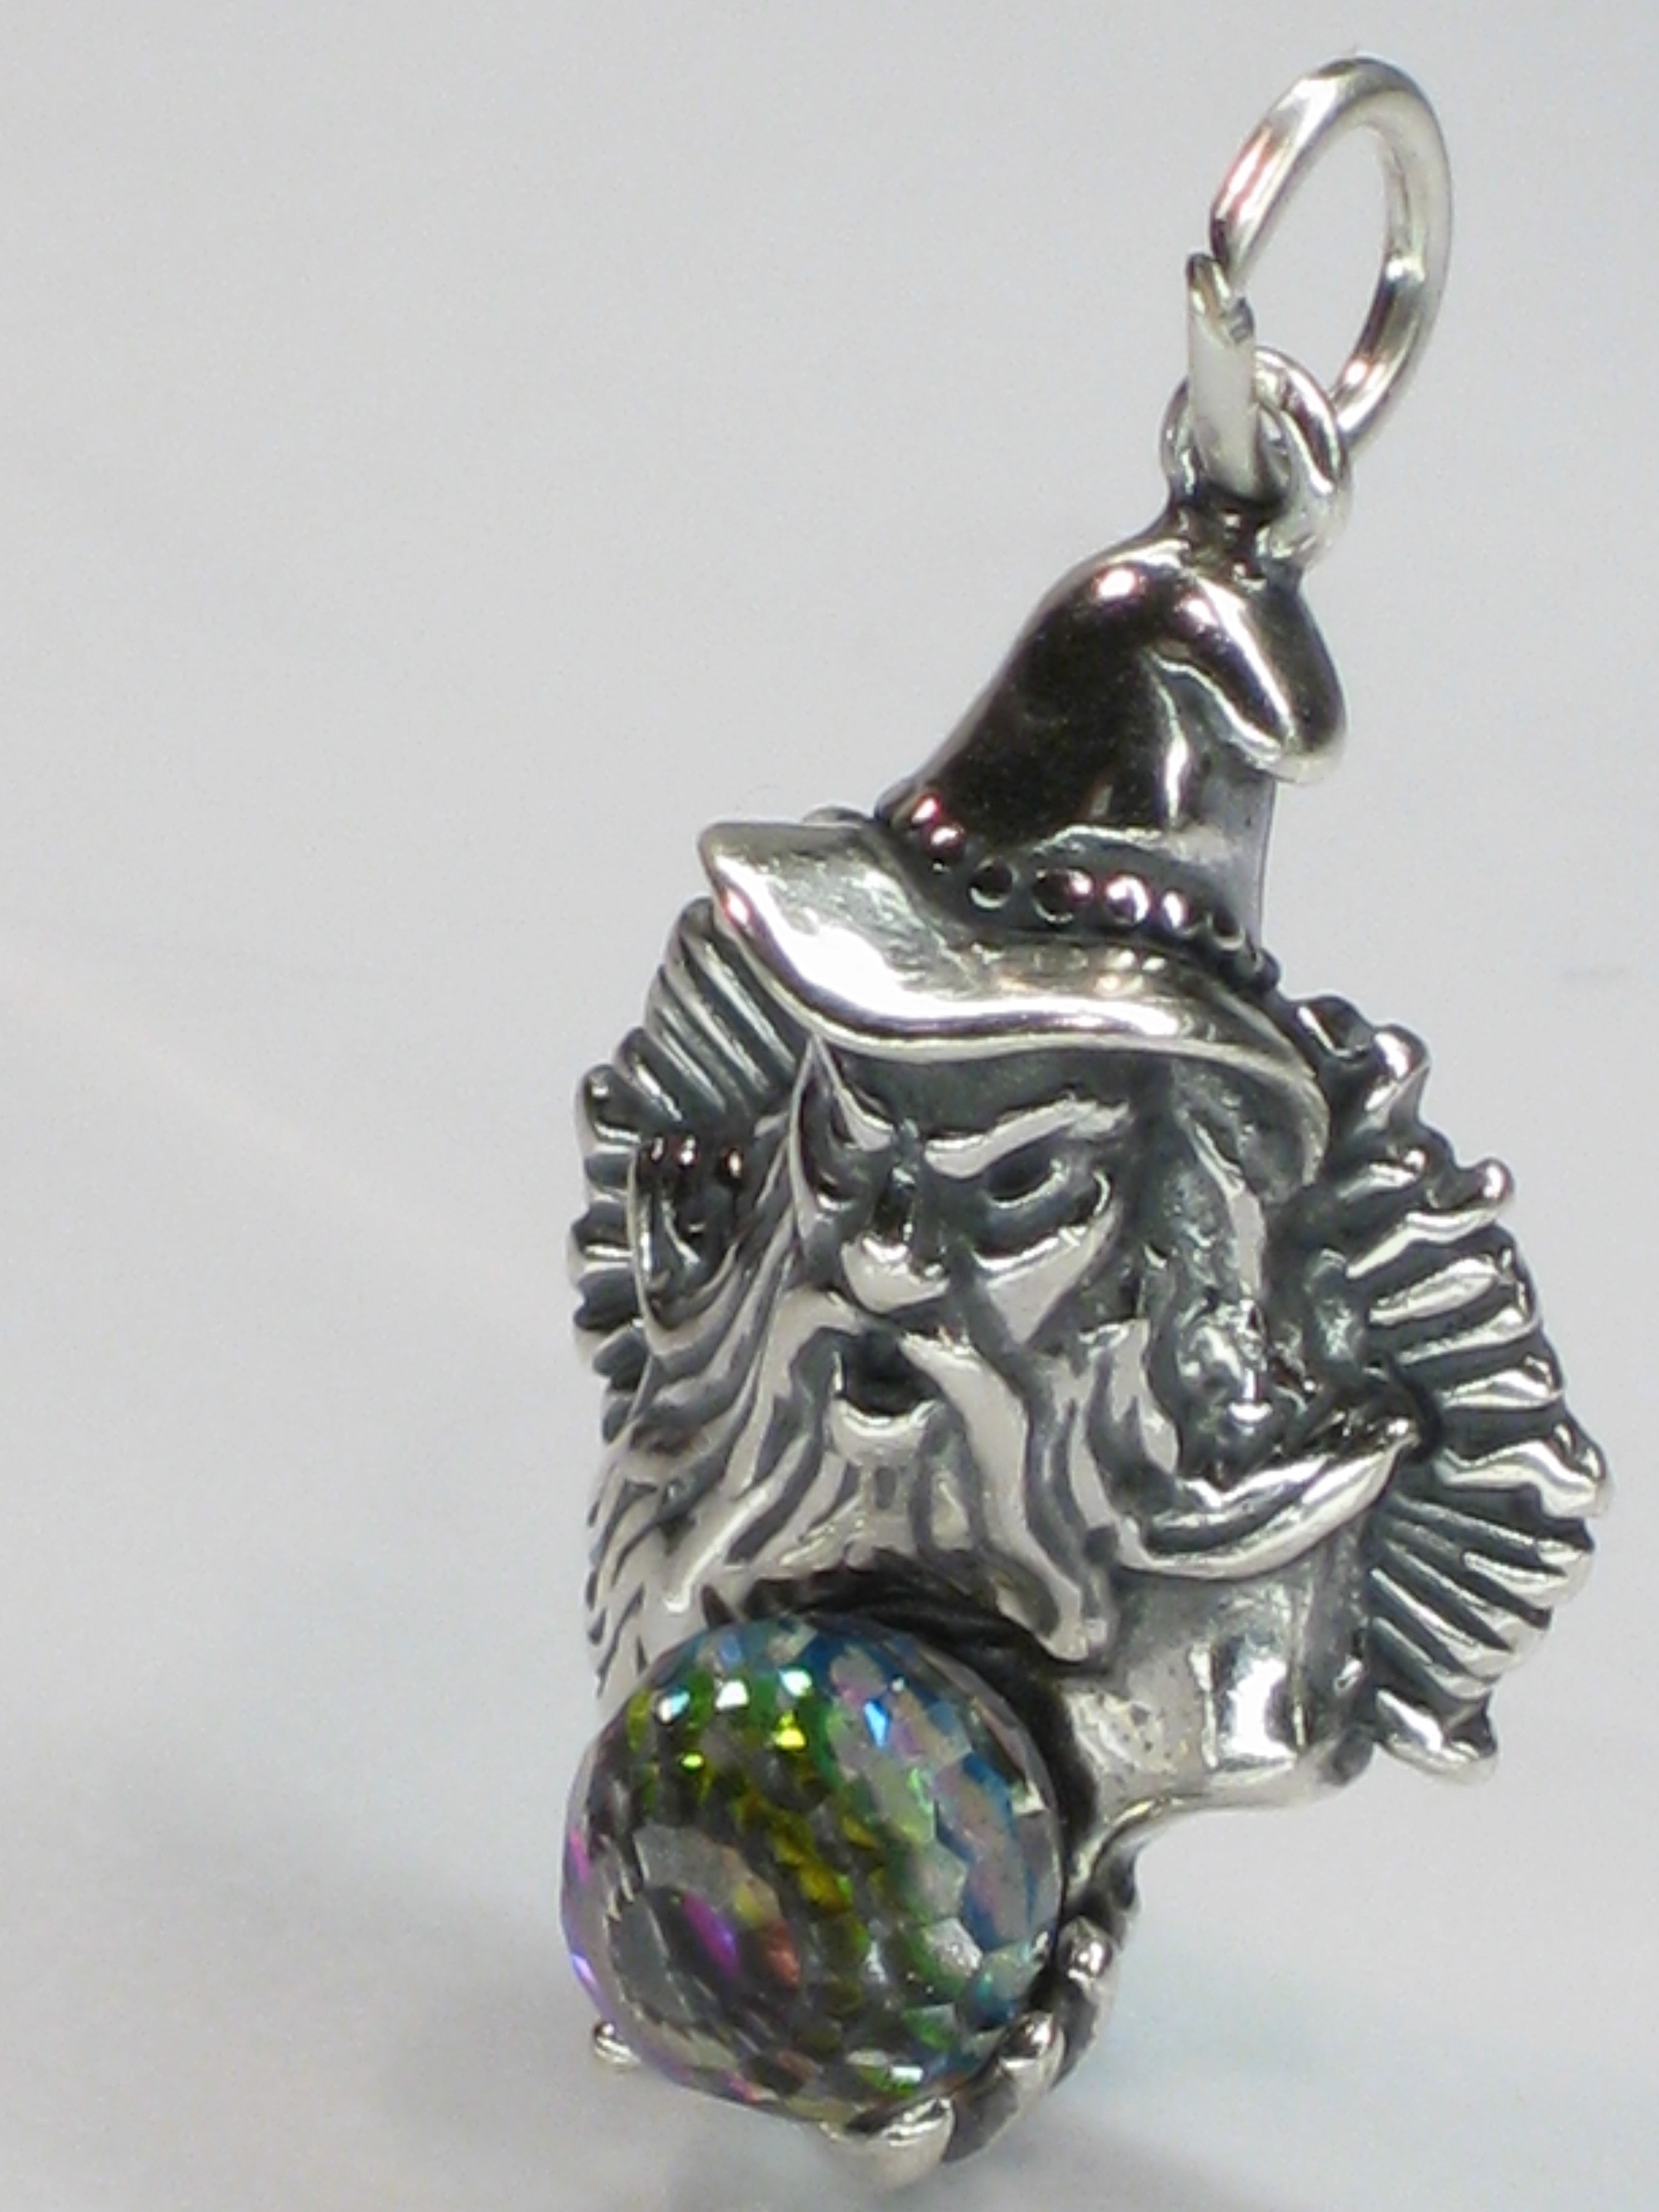 Wizard sterling silver charm .925 x 1 Wizards charms DKC9378